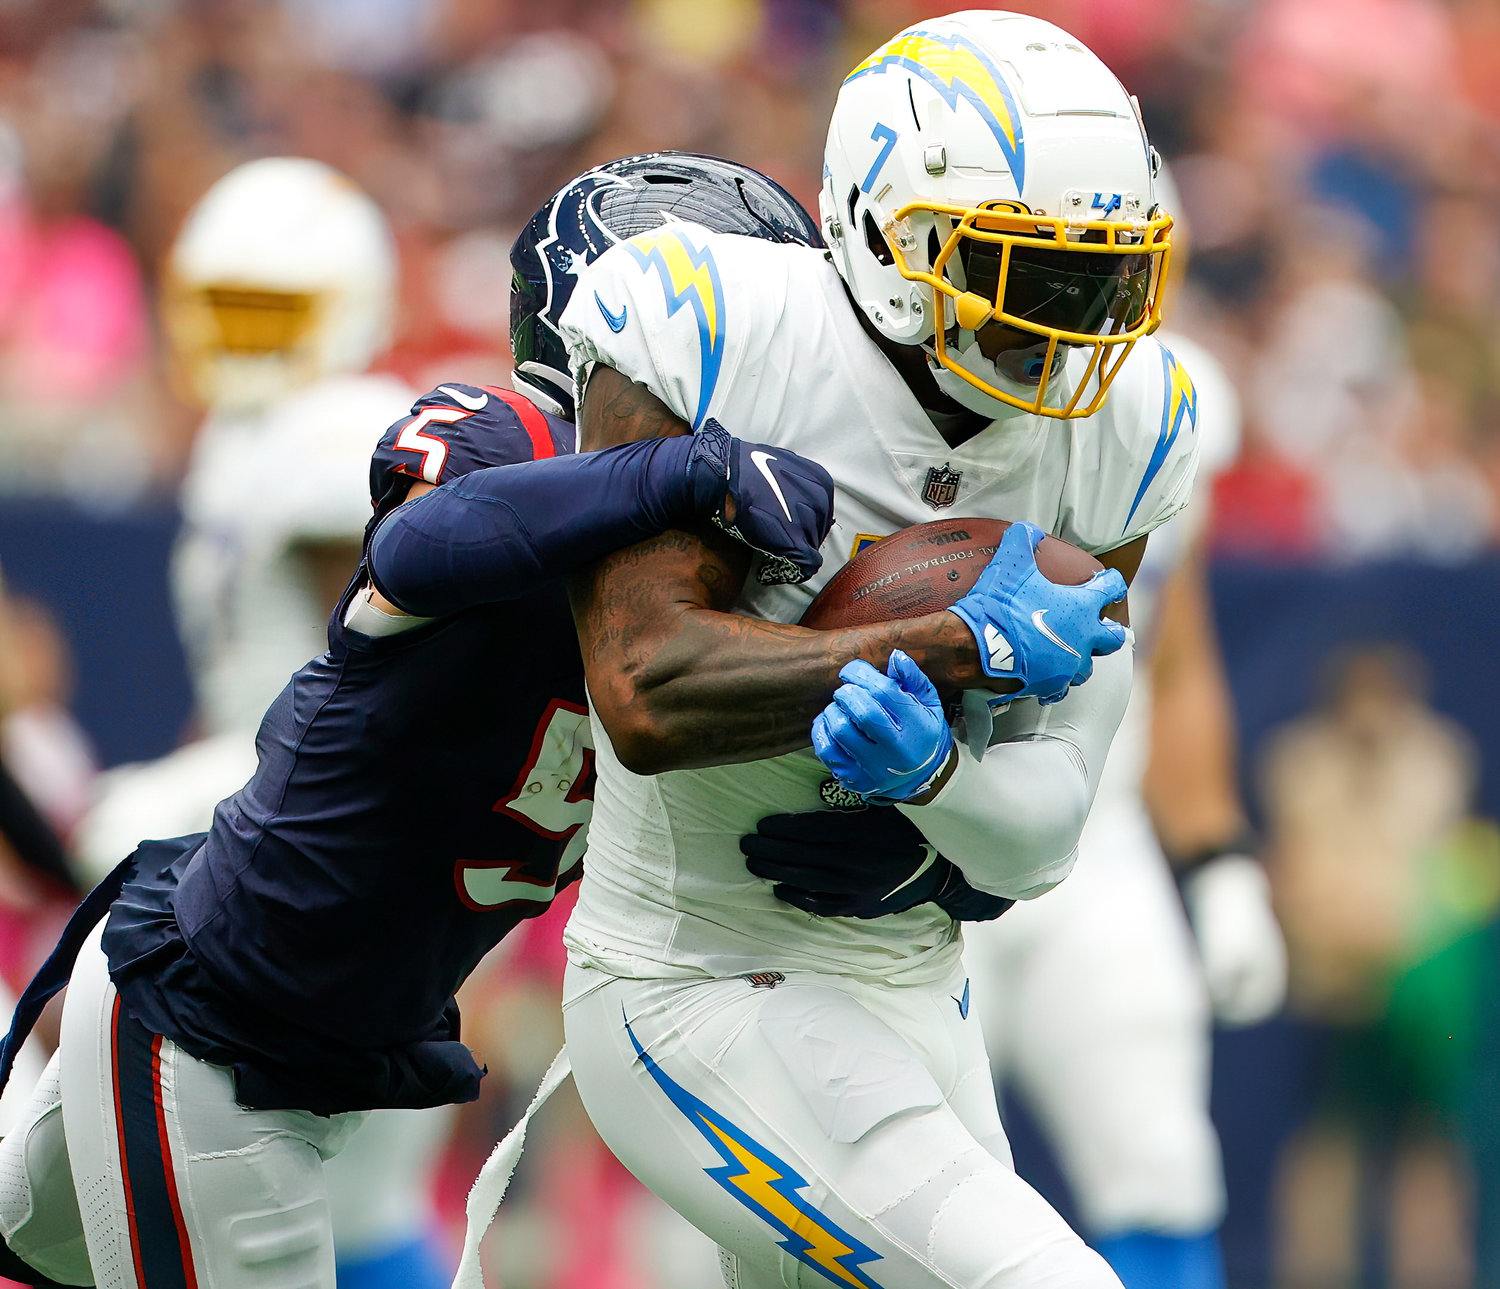 Chargers tight end Gerald Everett (7) holds onto the ball after a catch during an NFL game between the Texans and the Chargers on Oct. 2, 2022 in Houston. The Chargers won 34-24.